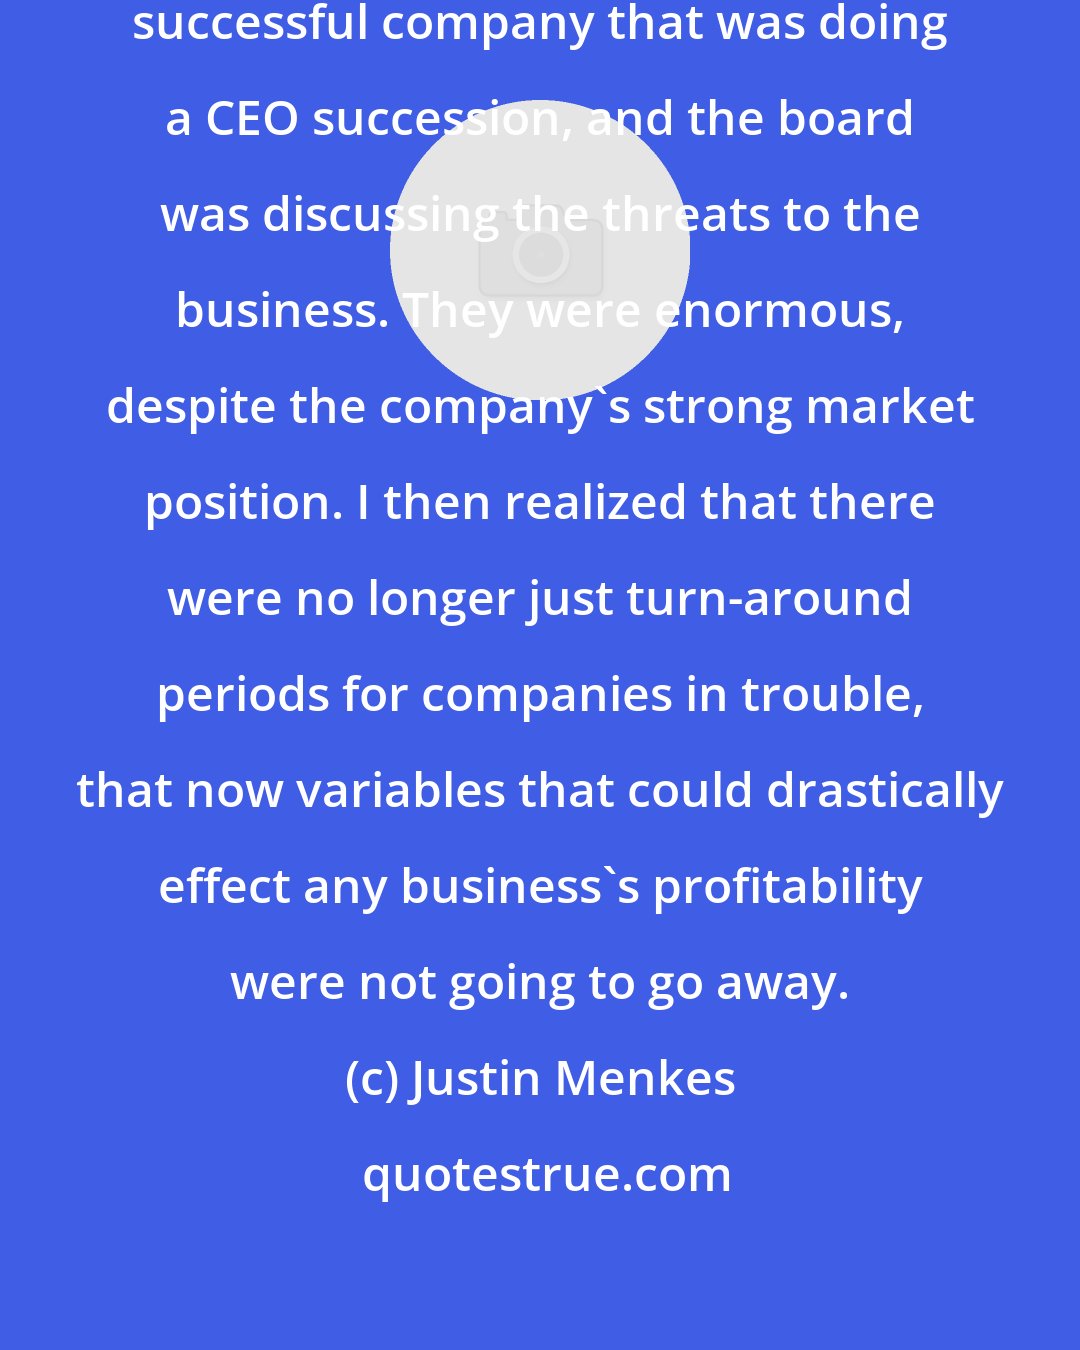 Justin Menkes: I was working with an extraordinarily successful company that was doing a CEO succession, and the board was discussing the threats to the business. They were enormous, despite the company's strong market position. I then realized that there were no longer just turn-around periods for companies in trouble, that now variables that could drastically effect any business's profitability were not going to go away.